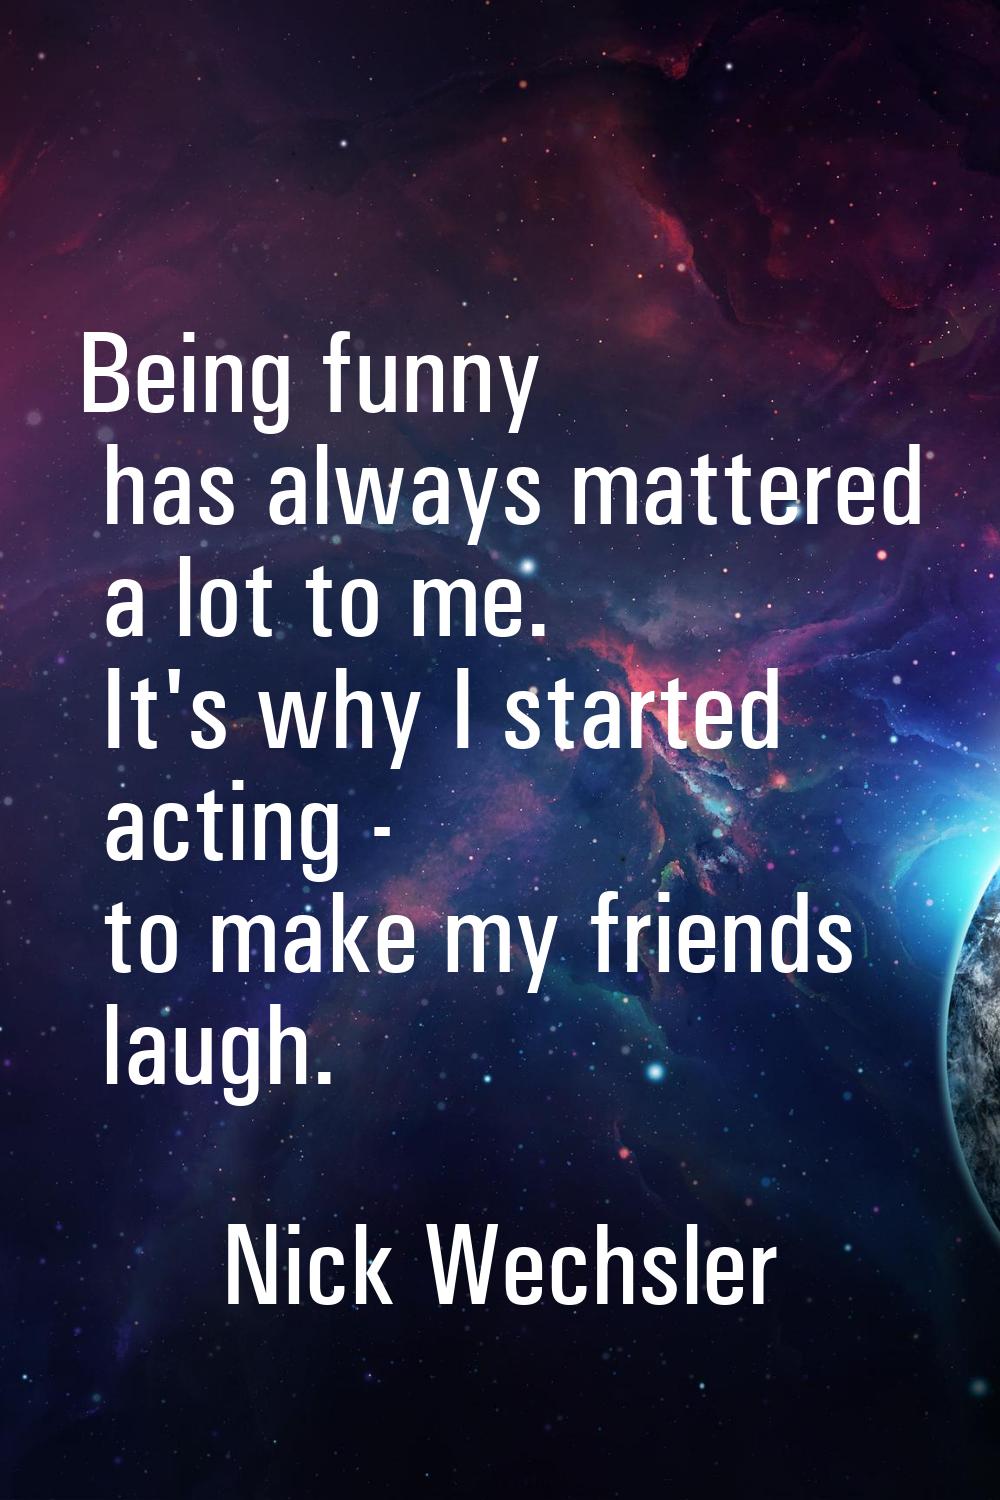 Being funny has always mattered a lot to me. It's why I started acting - to make my friends laugh.